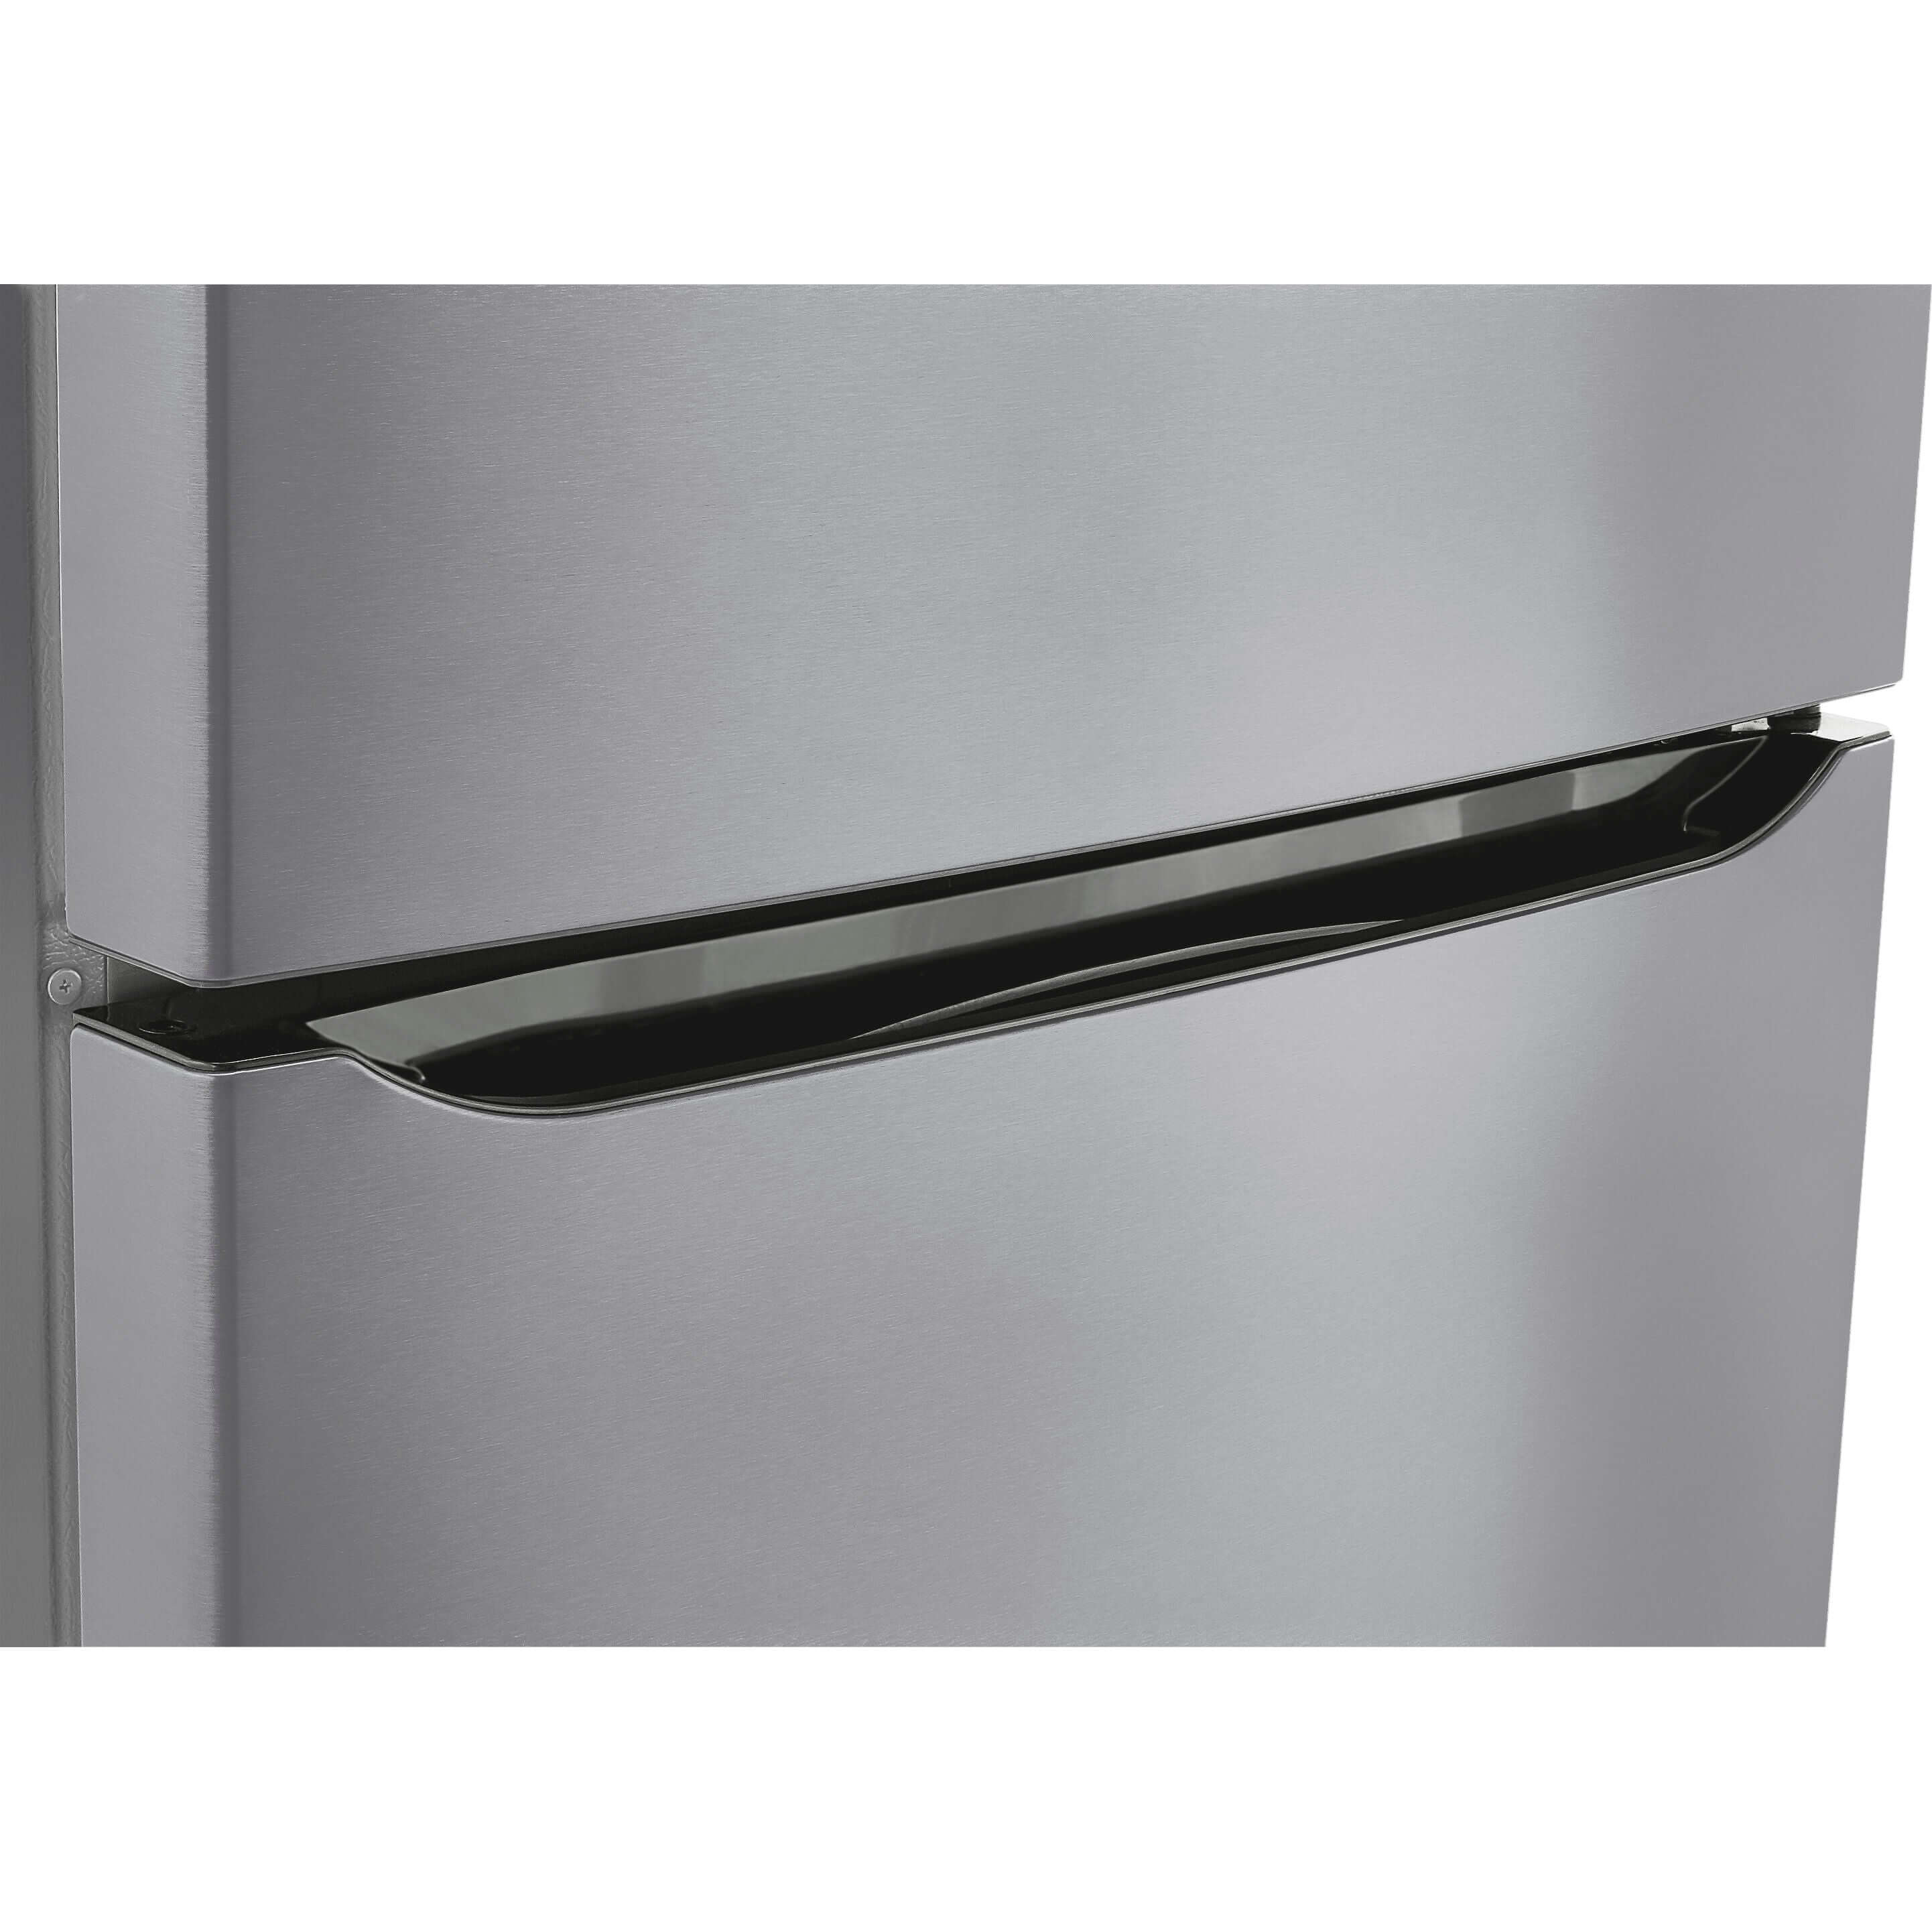 LG 30 Inch Top Mount Refrigerator in Stainless Steel 20 Cu. Ft. (LTCS20020S)